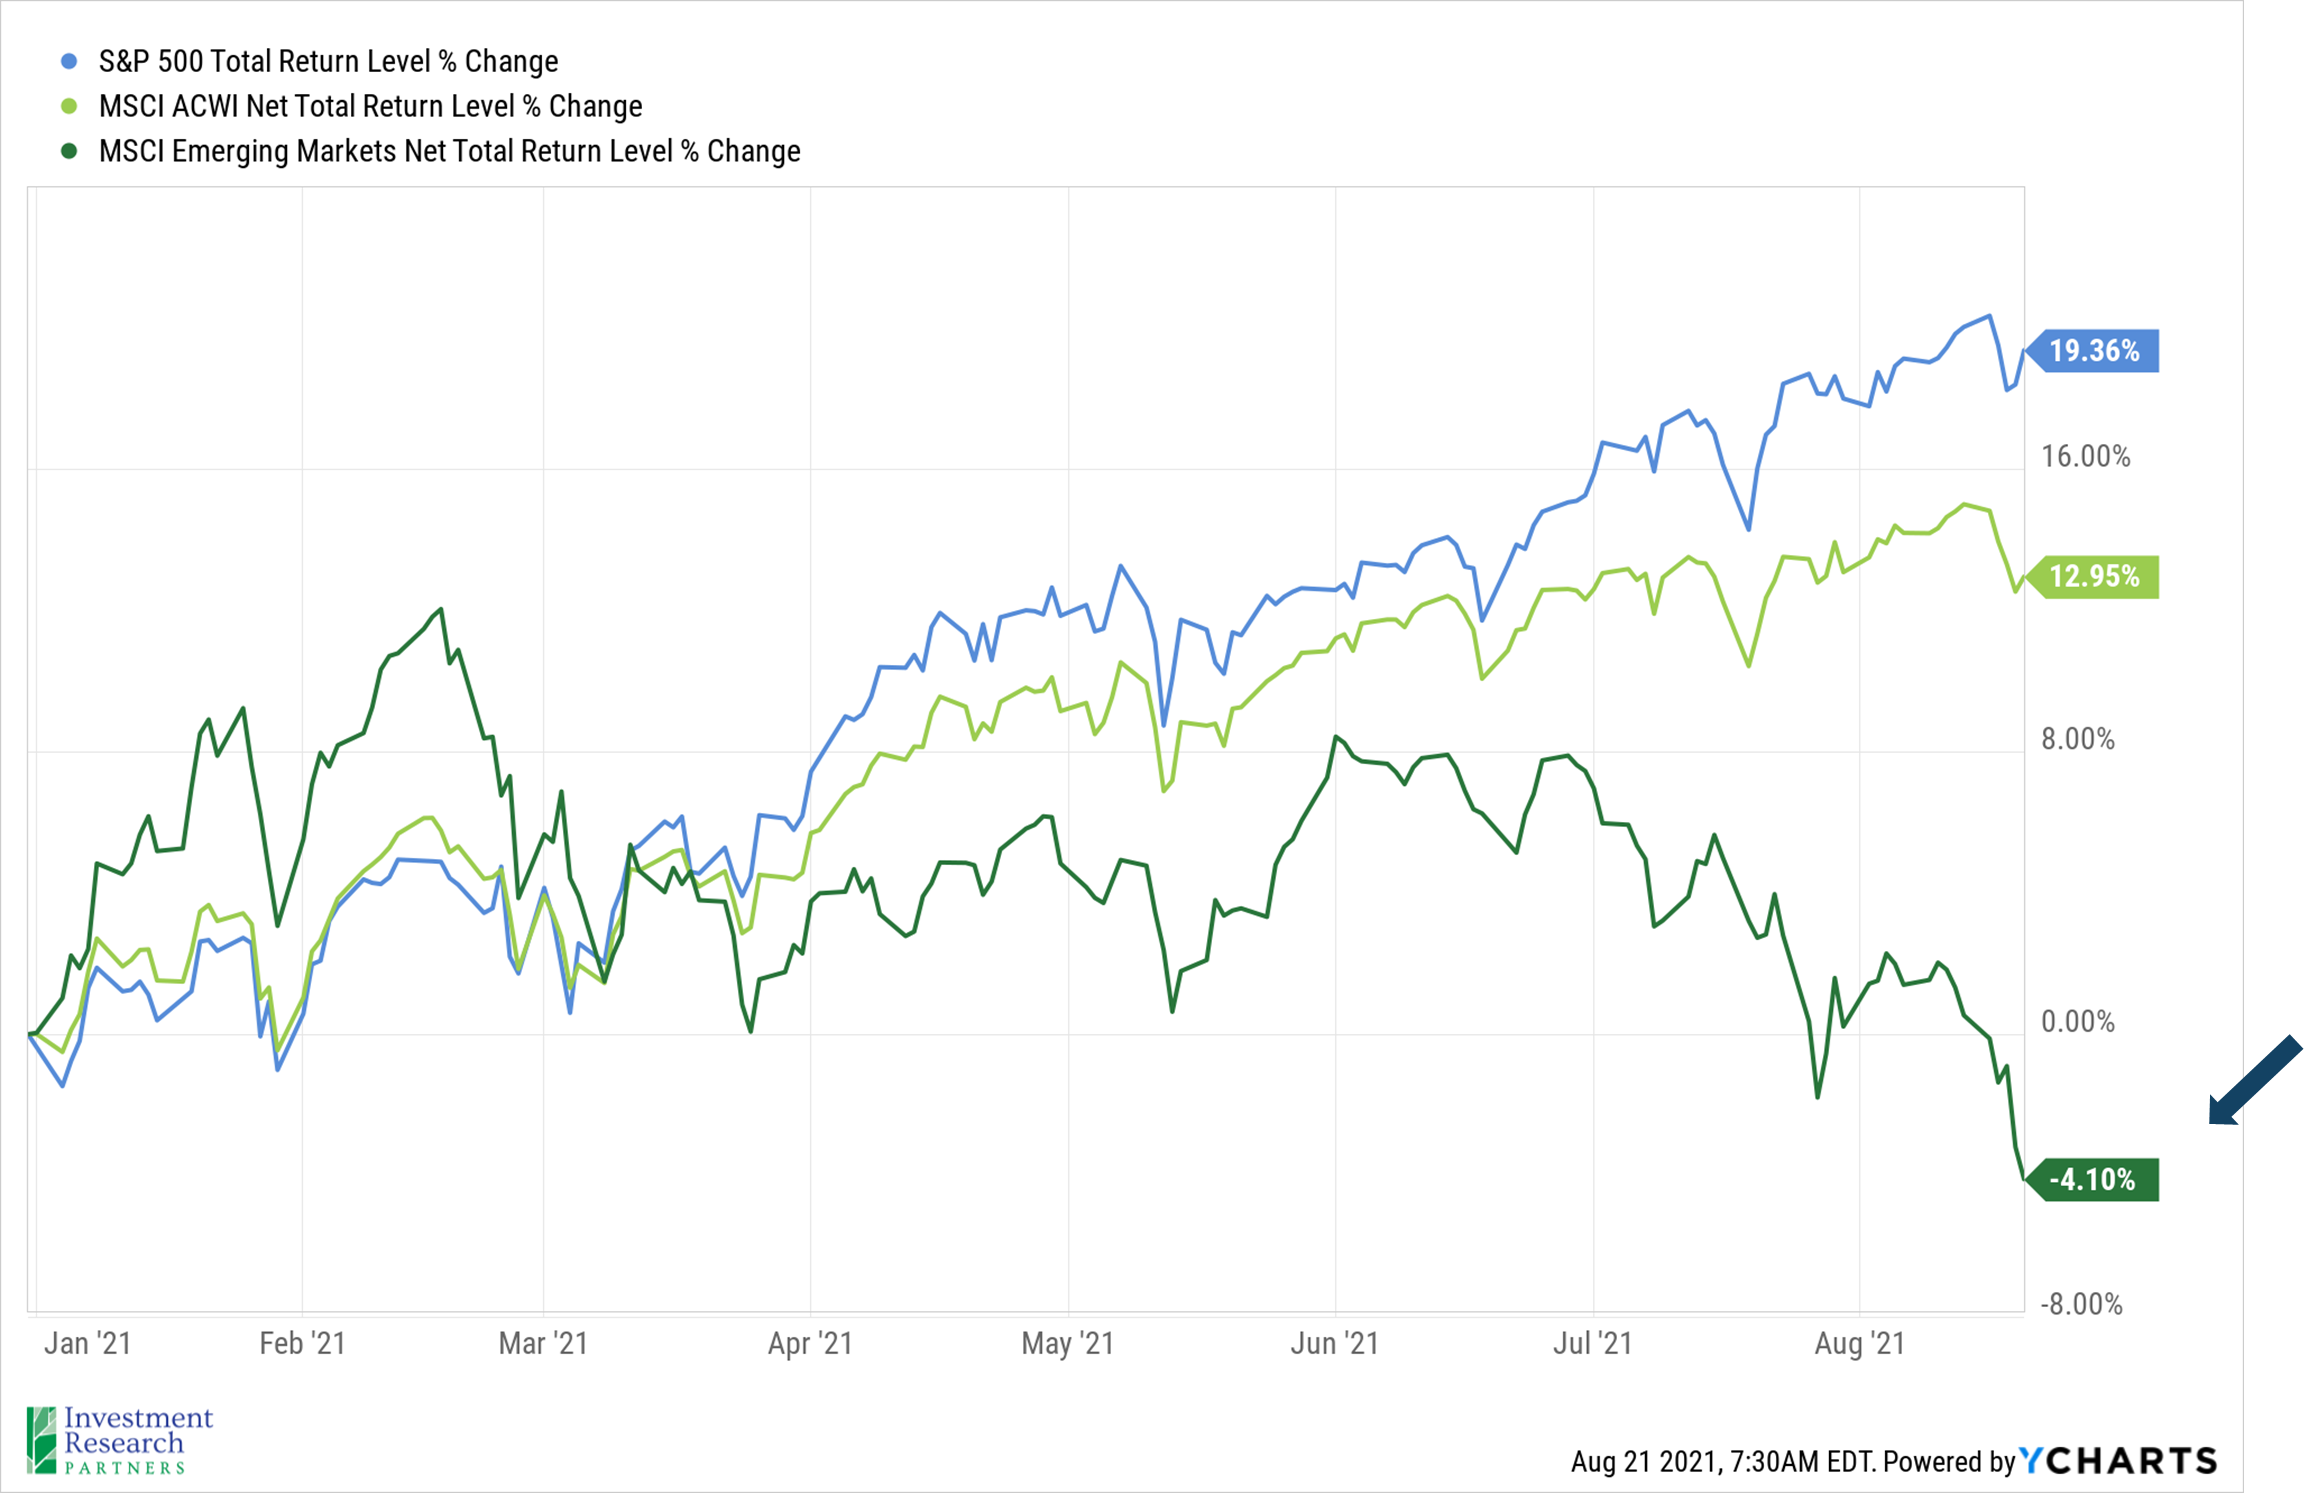 Line graph depicting S&P 500 Total Return Level % Change, MSCI ACWI Net Total Return Level % Change, and MSCI Emerging Markets Net Total Return Level % Change from January 2021 to August 2021